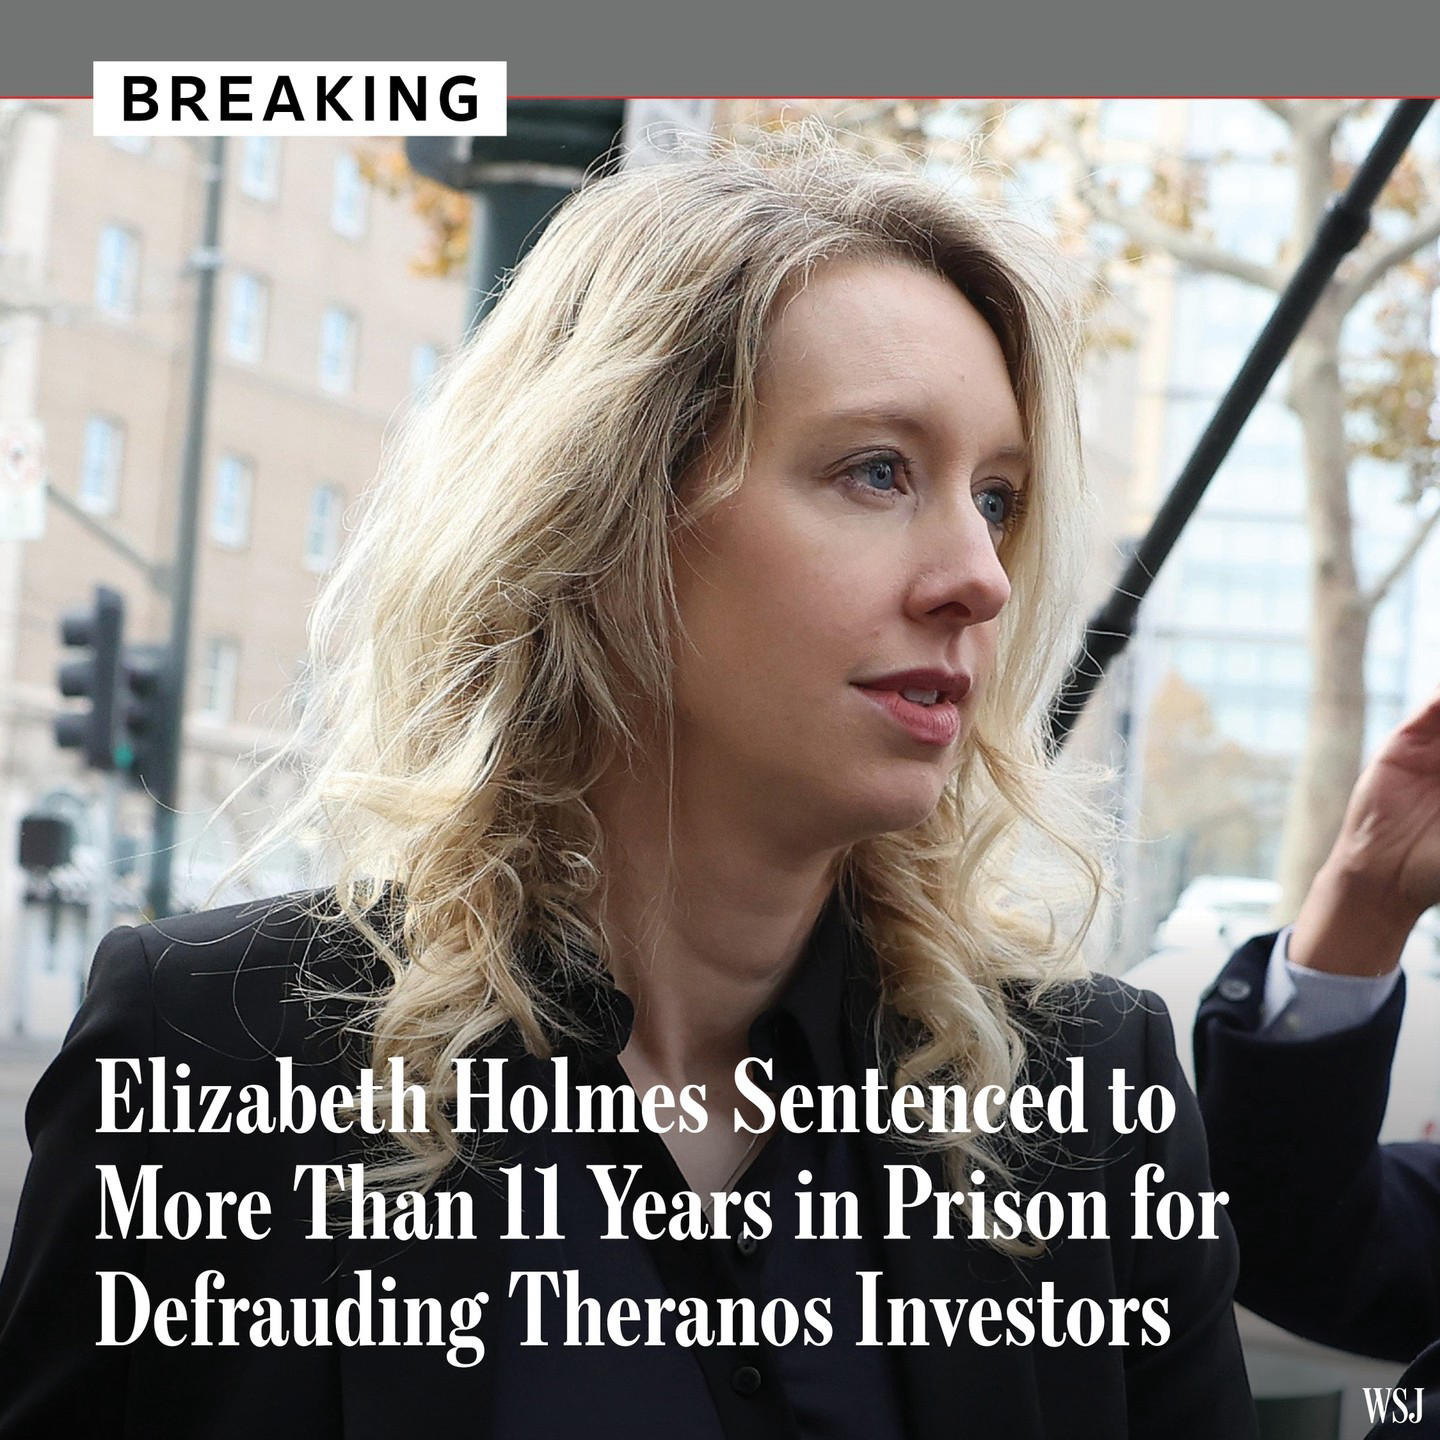 The Wall Street Journal - Elizabeth Holmes, the Theranos founder convicted of fraud, was sentenced t